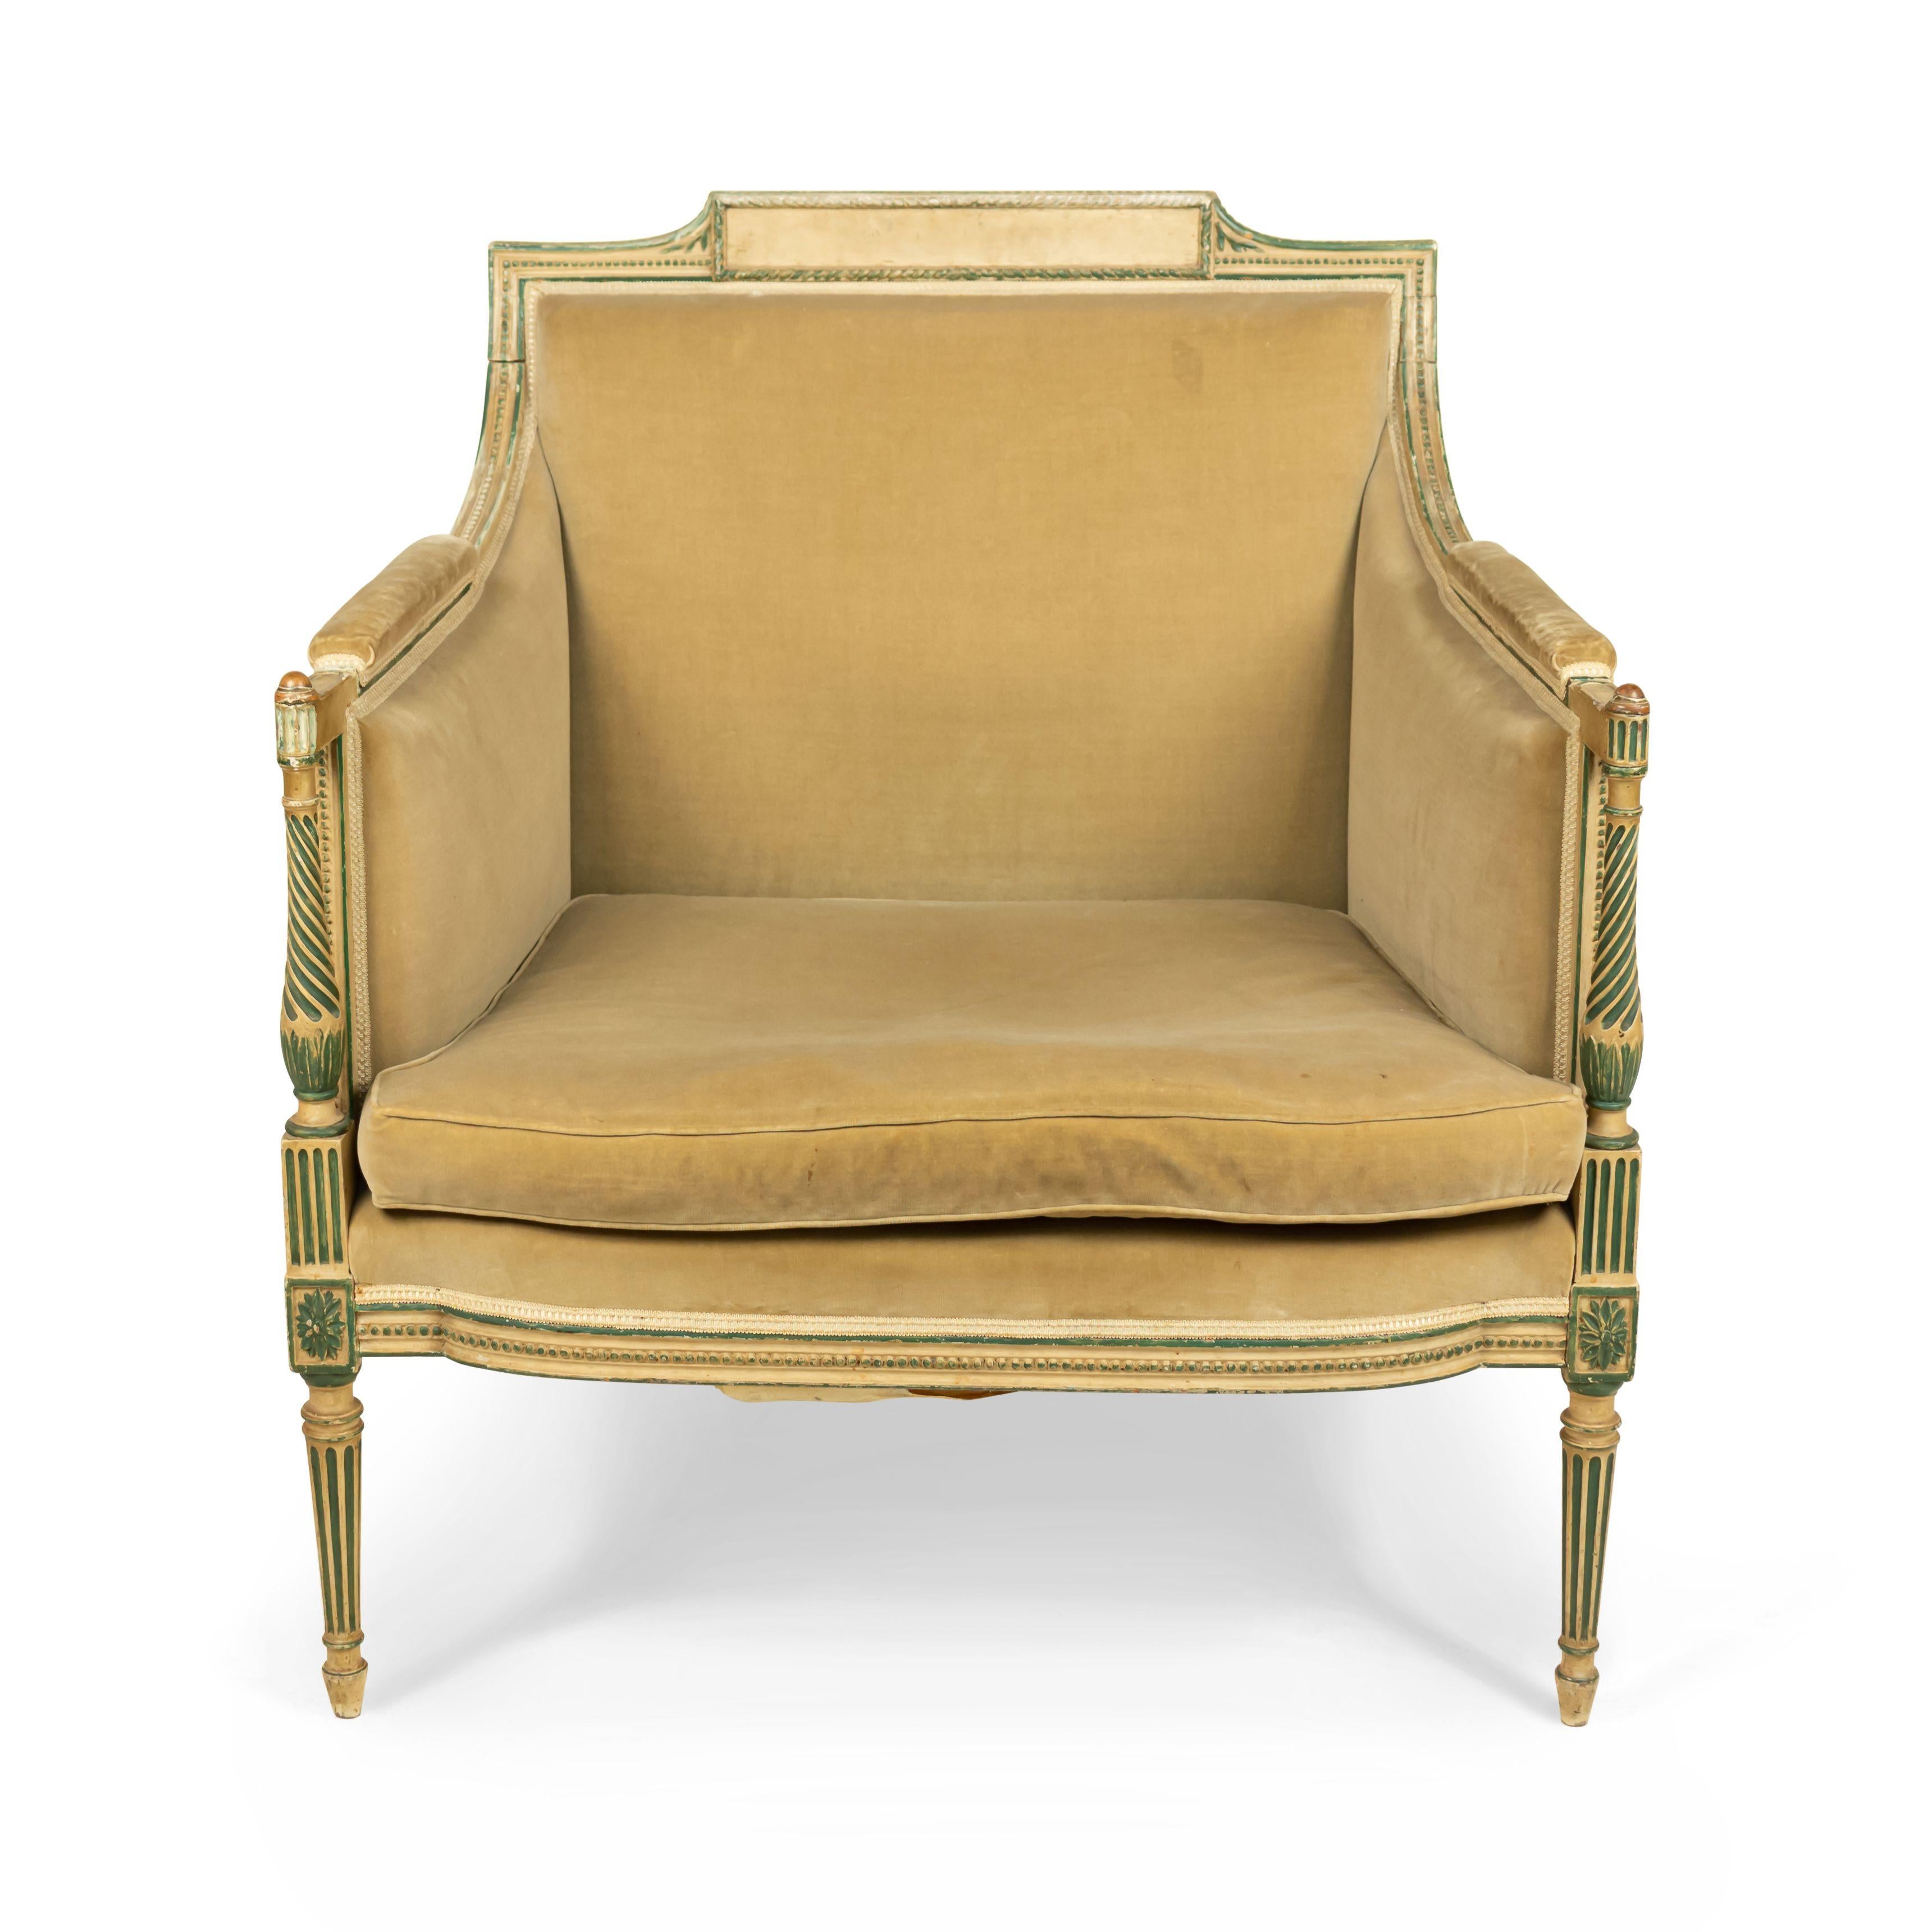 French Louis XVI painted gold and green trimmed bergère (Marquis) with gold upholstery.